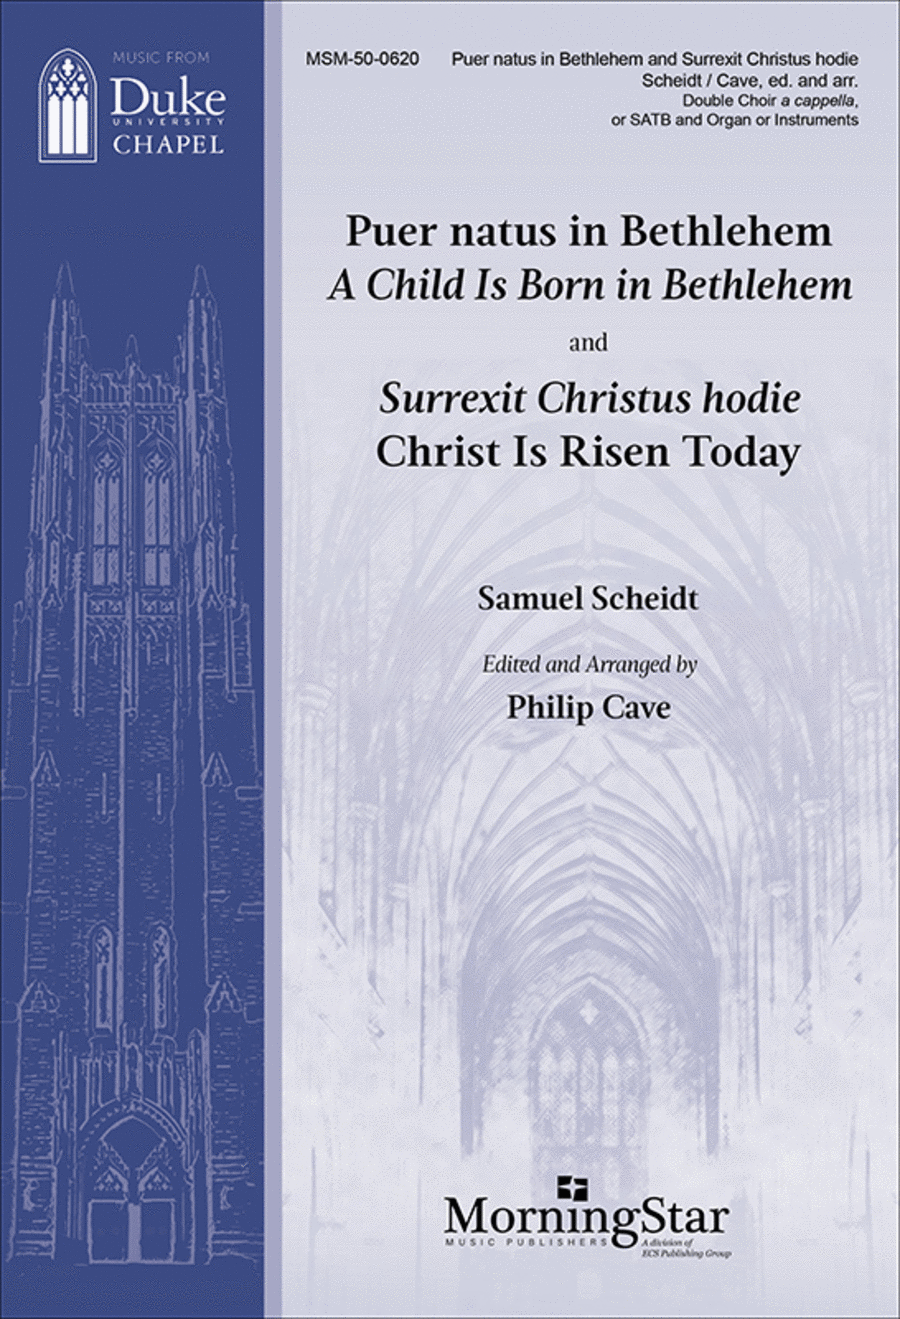 Puer natus in Bethlehem and Surrexit Christus hodie: A Child Is Born in Bethlehem and Christ Is Risen Today (Choral Score)